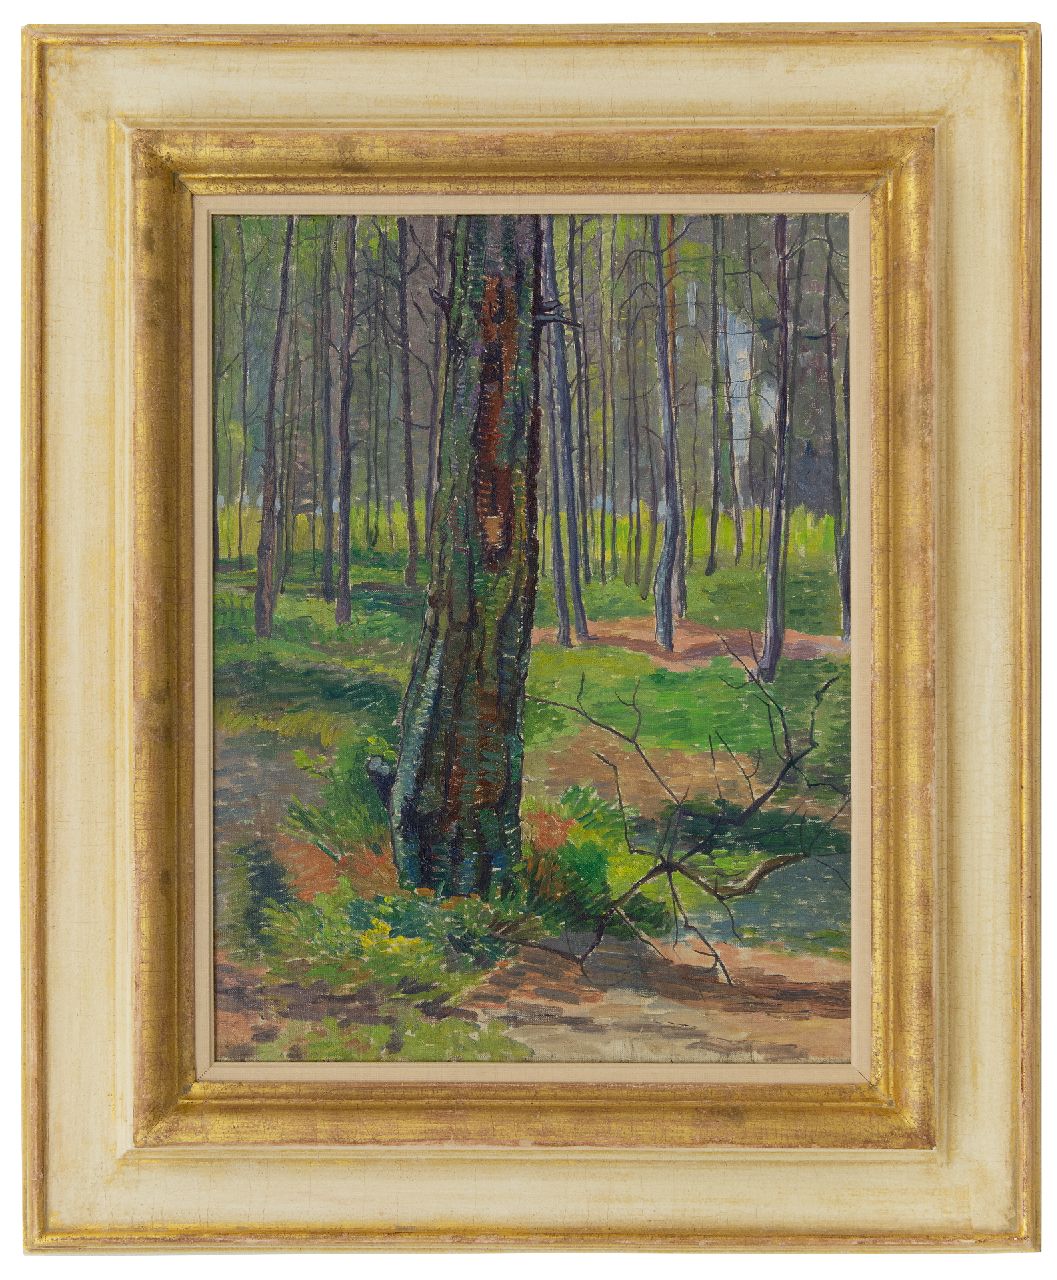 Pijpers E.E.  | 'Edith' Elizabeth Pijpers | Paintings offered for sale | Forest, oil on canvas 48.4 x 37.7 cm